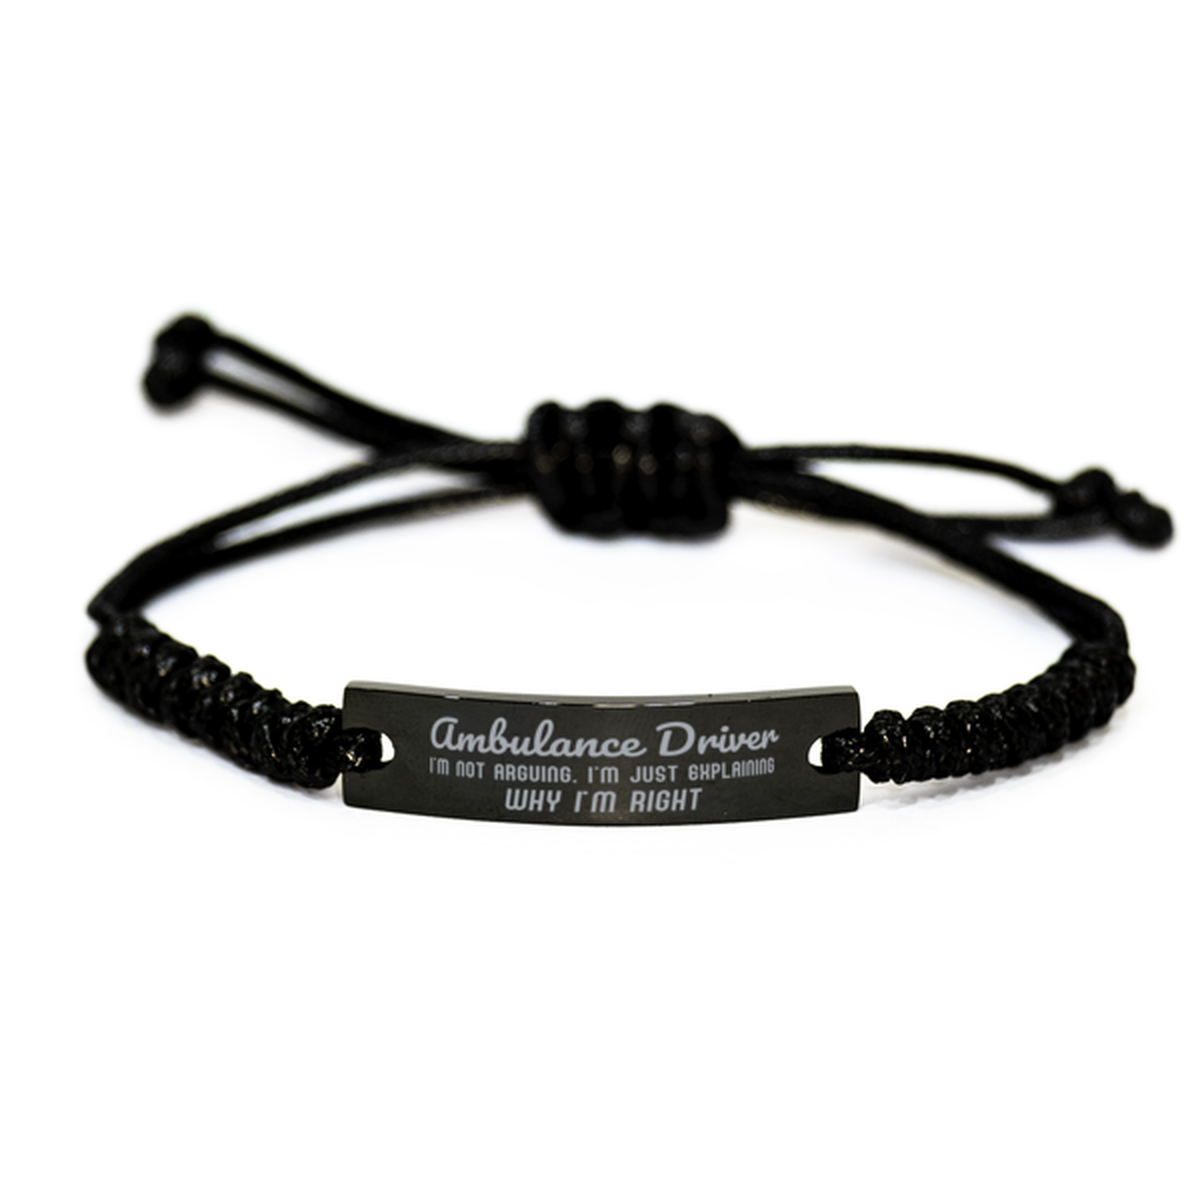 Ambulance Driver I'm not Arguing. I'm Just Explaining Why I'm RIGHT Black Rope Bracelet, Funny Saying Quote Ambulance Driver Gifts For Ambulance Driver Graduation Birthday Christmas Gifts for Men Women Coworker